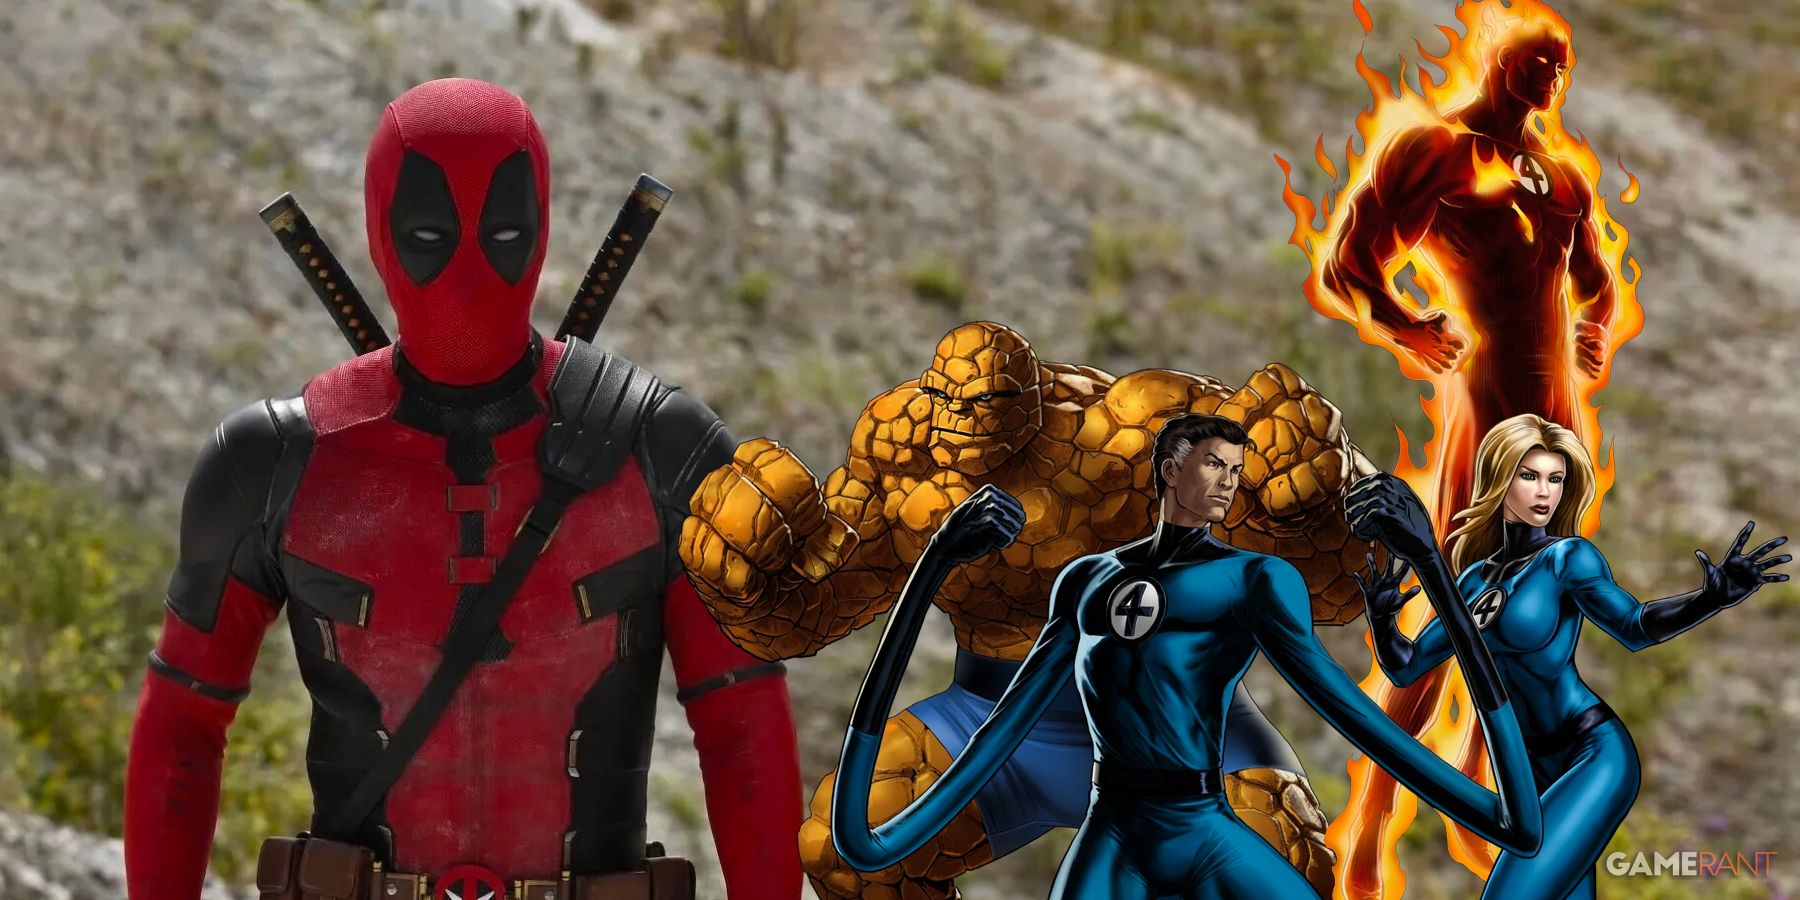 Deadpool 3 Fan Imagines Character's MCU Arrival With Hilarious